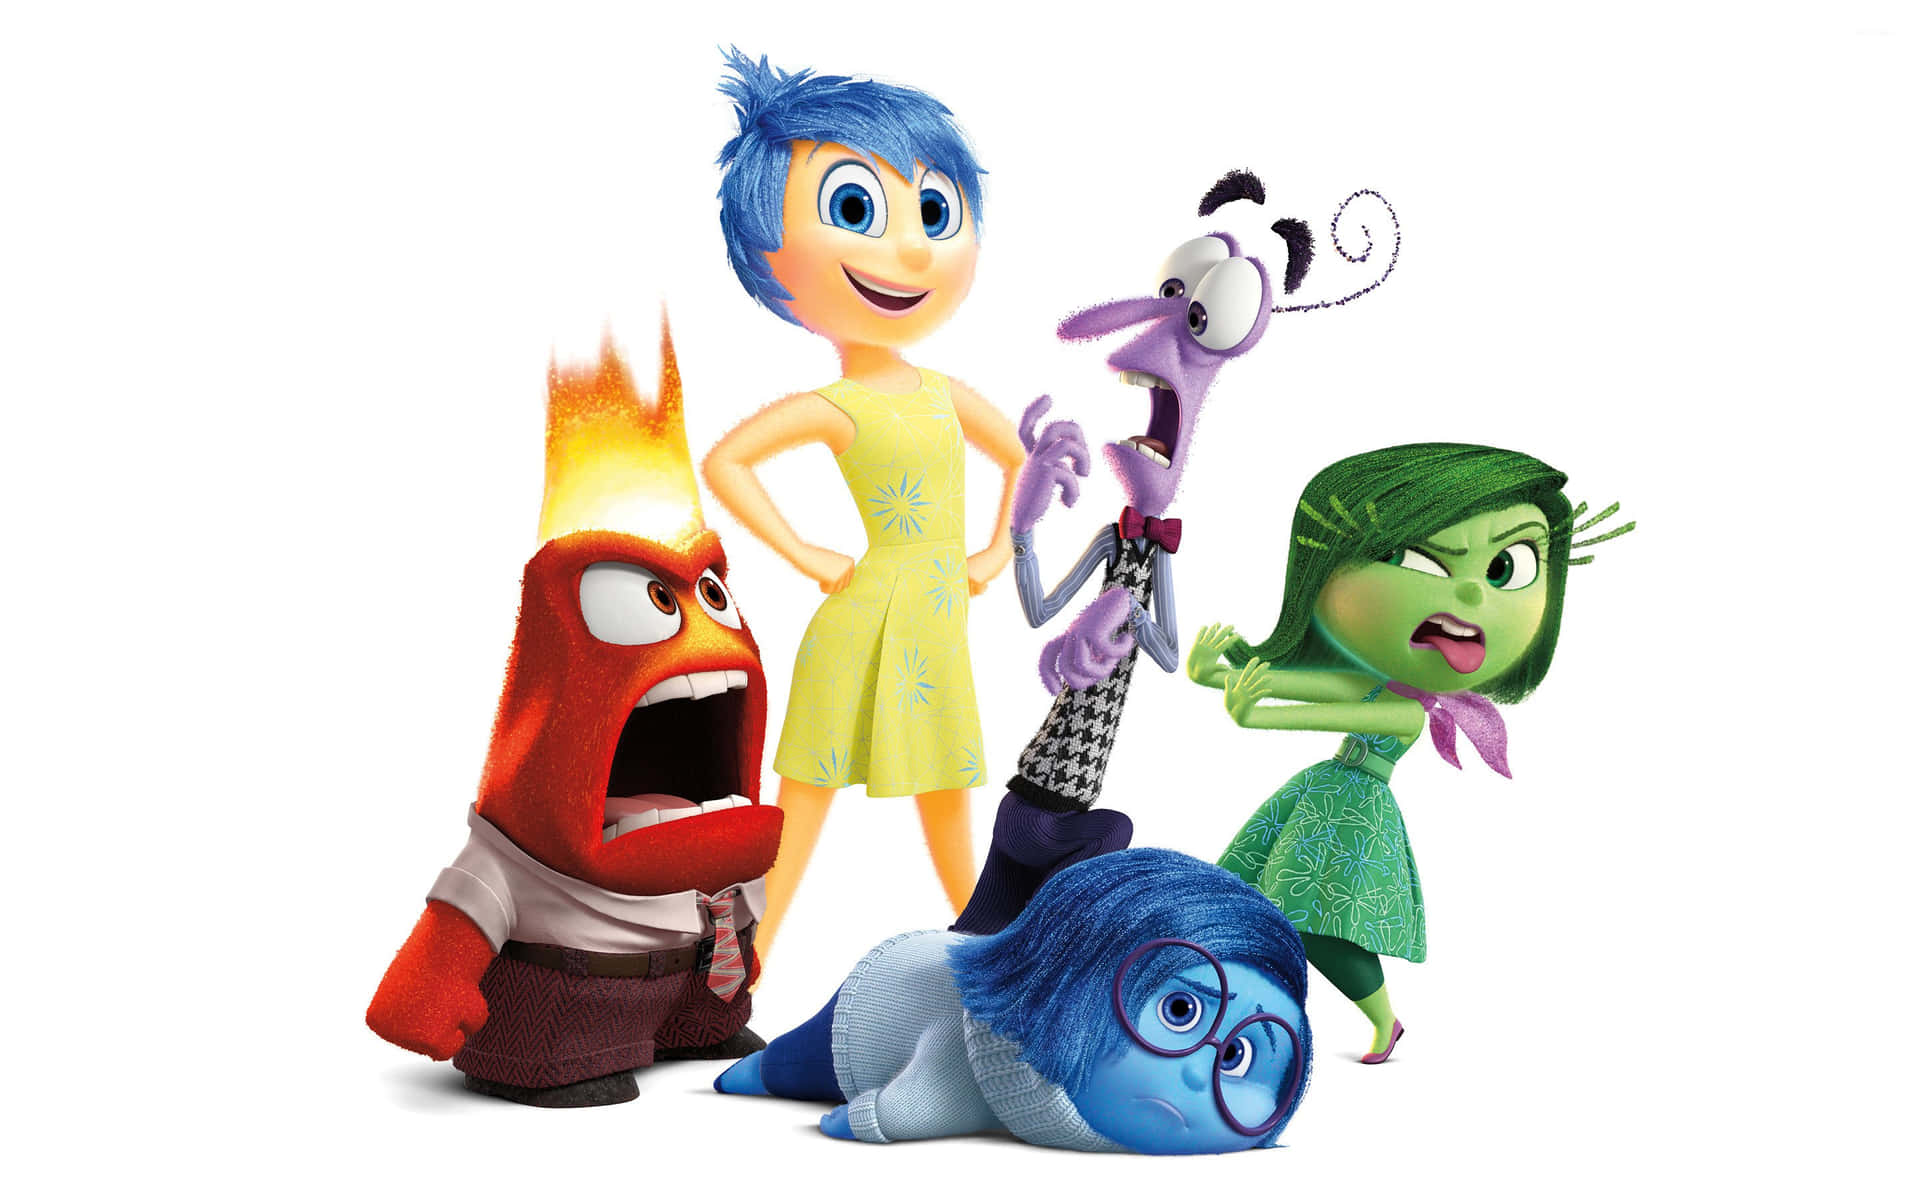 Image  The five emotions from the movie Inside Out